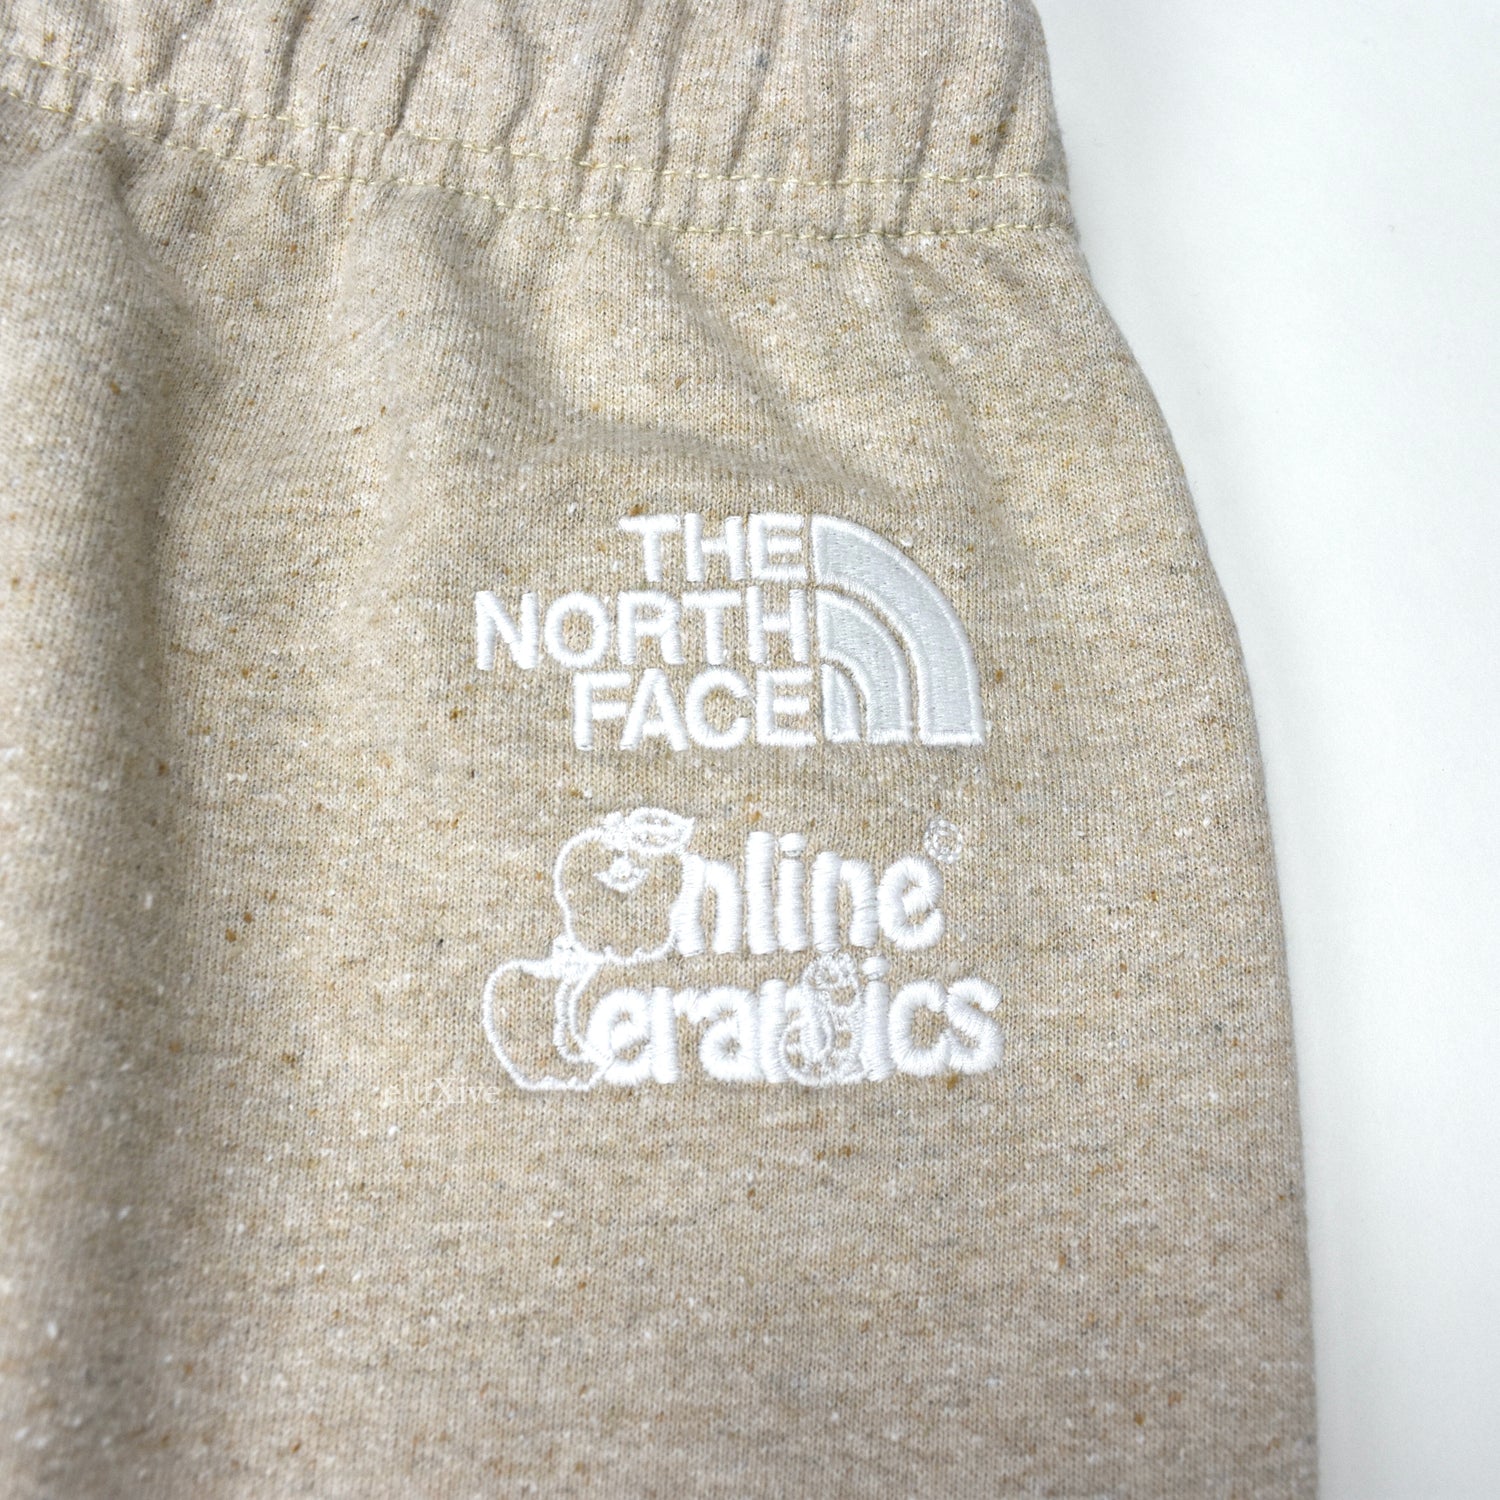 THE NORTH FACE x ONLINE CERAMICS TAPERED BEIGE LOGO SWEATPANTS